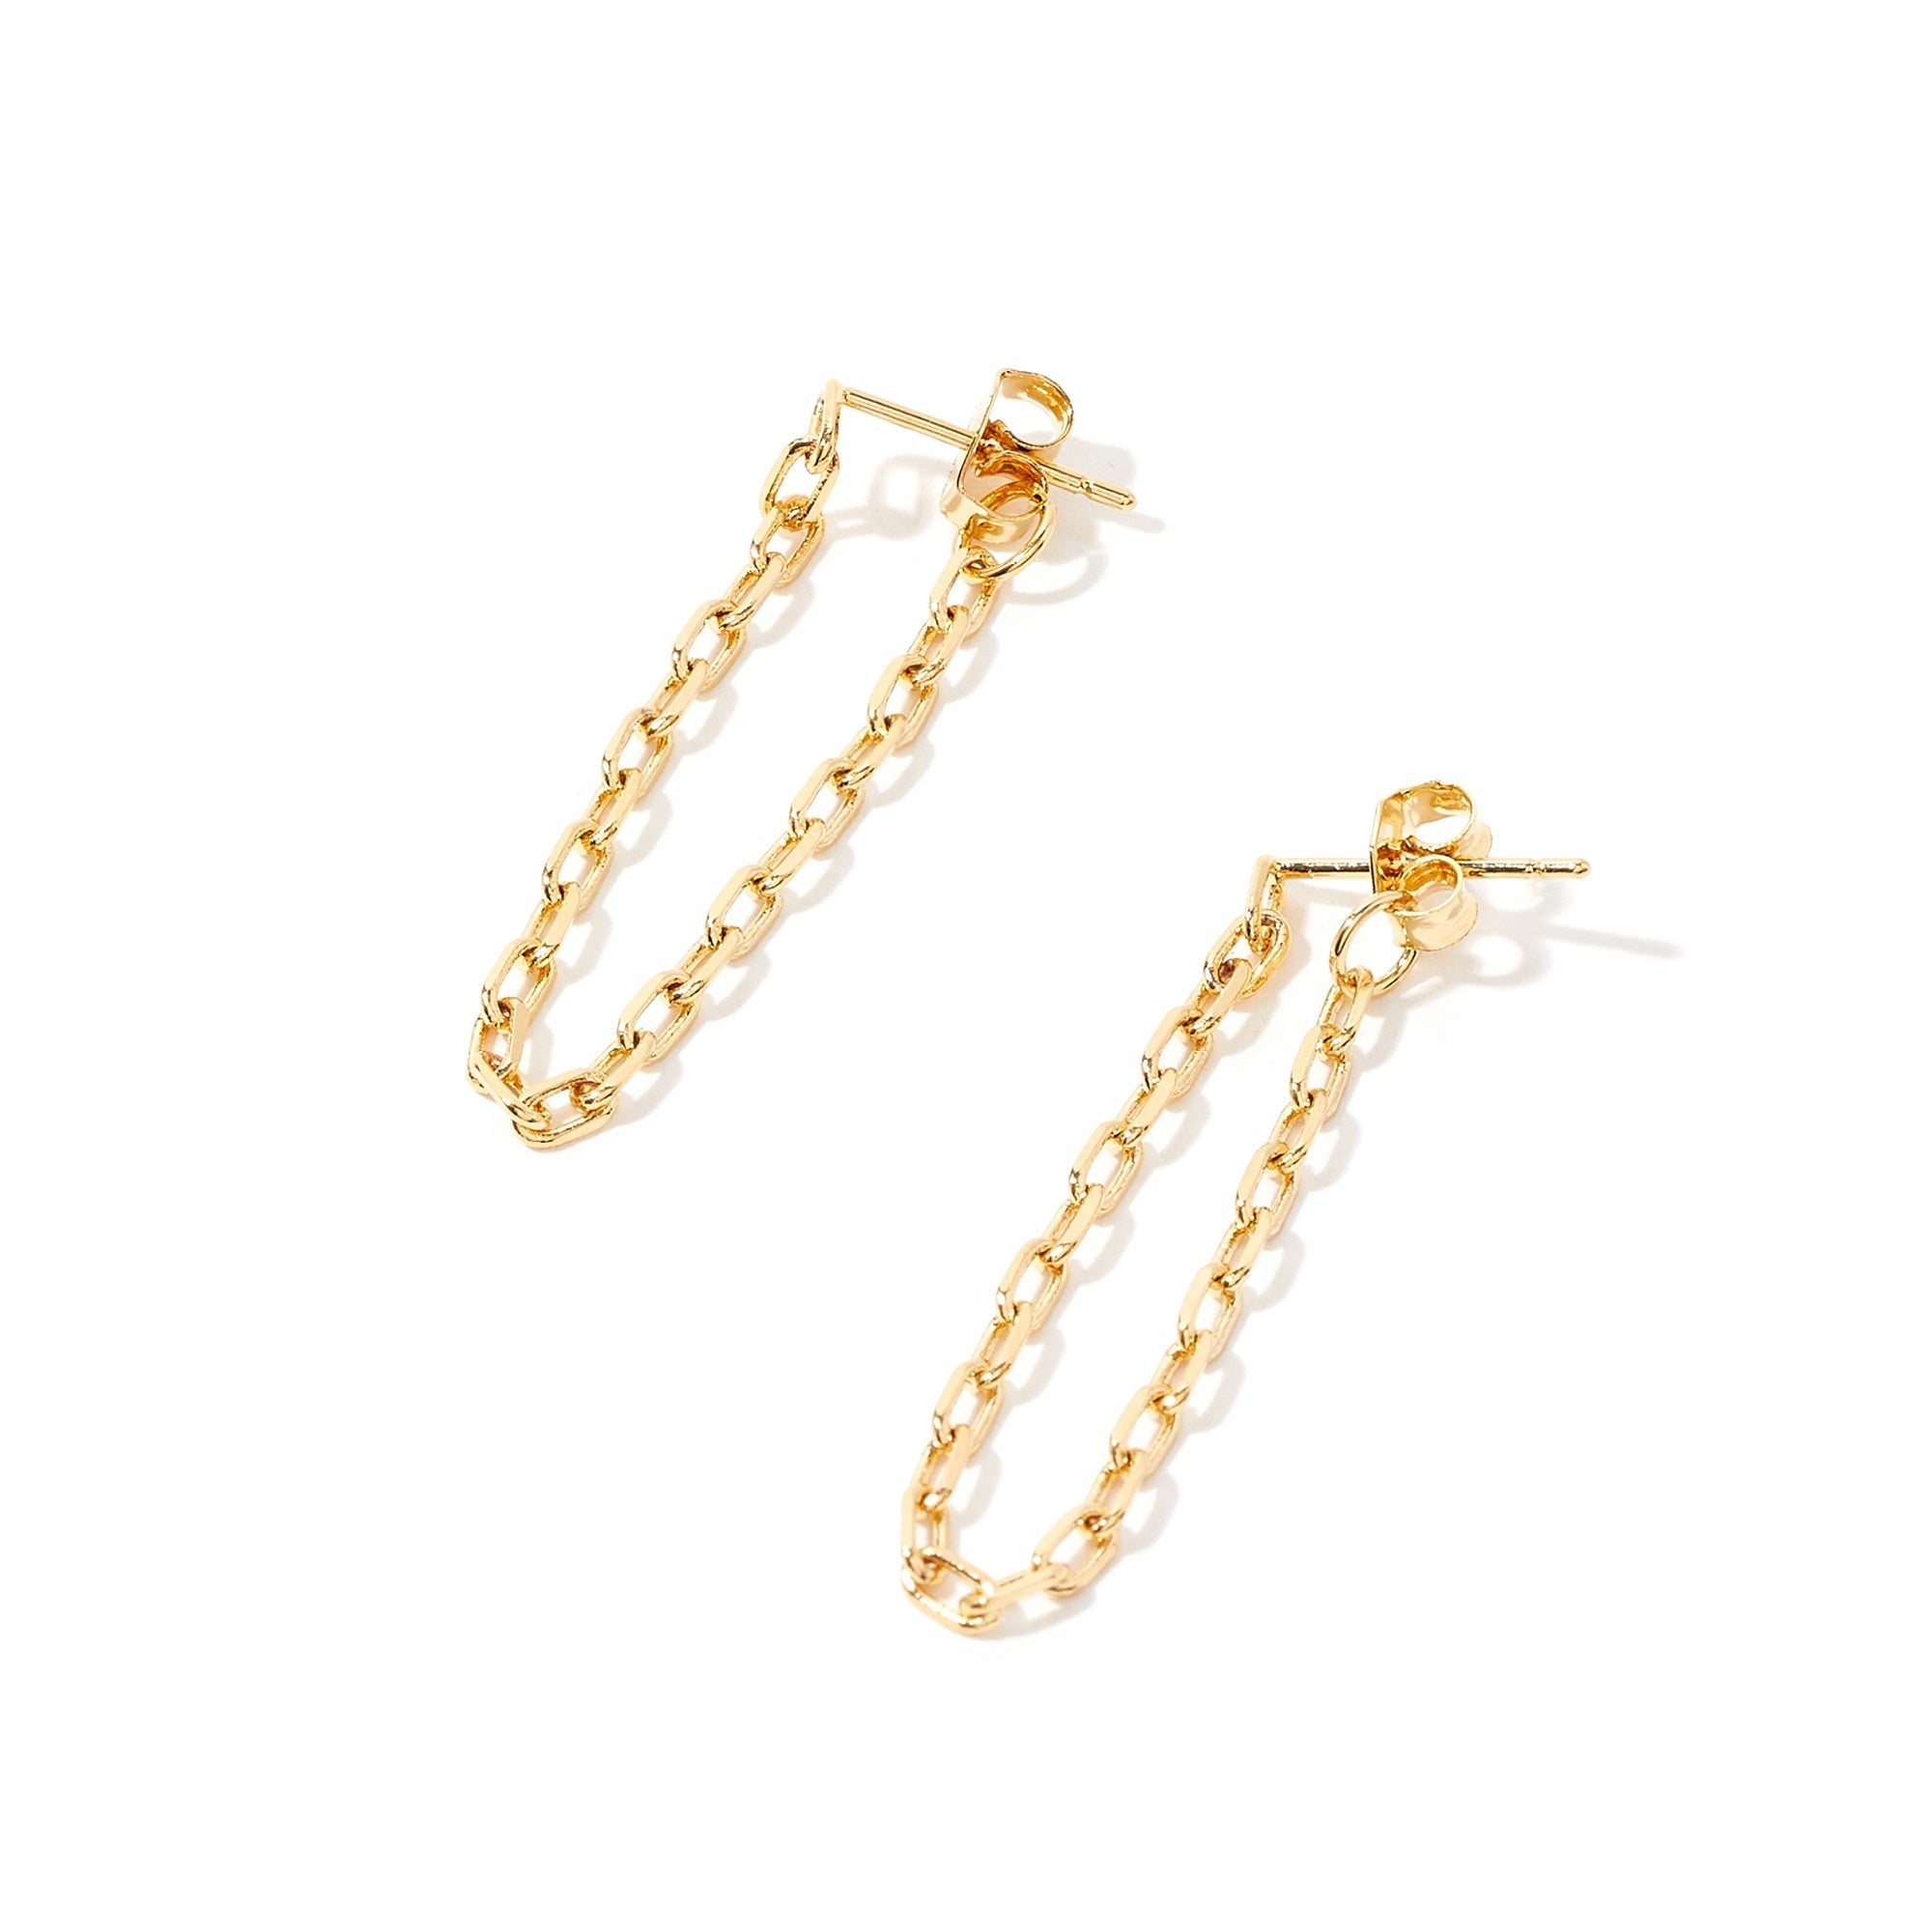 Real Gold Plated Fancy Paperclip Drop Earrings For Women By Accessorize London